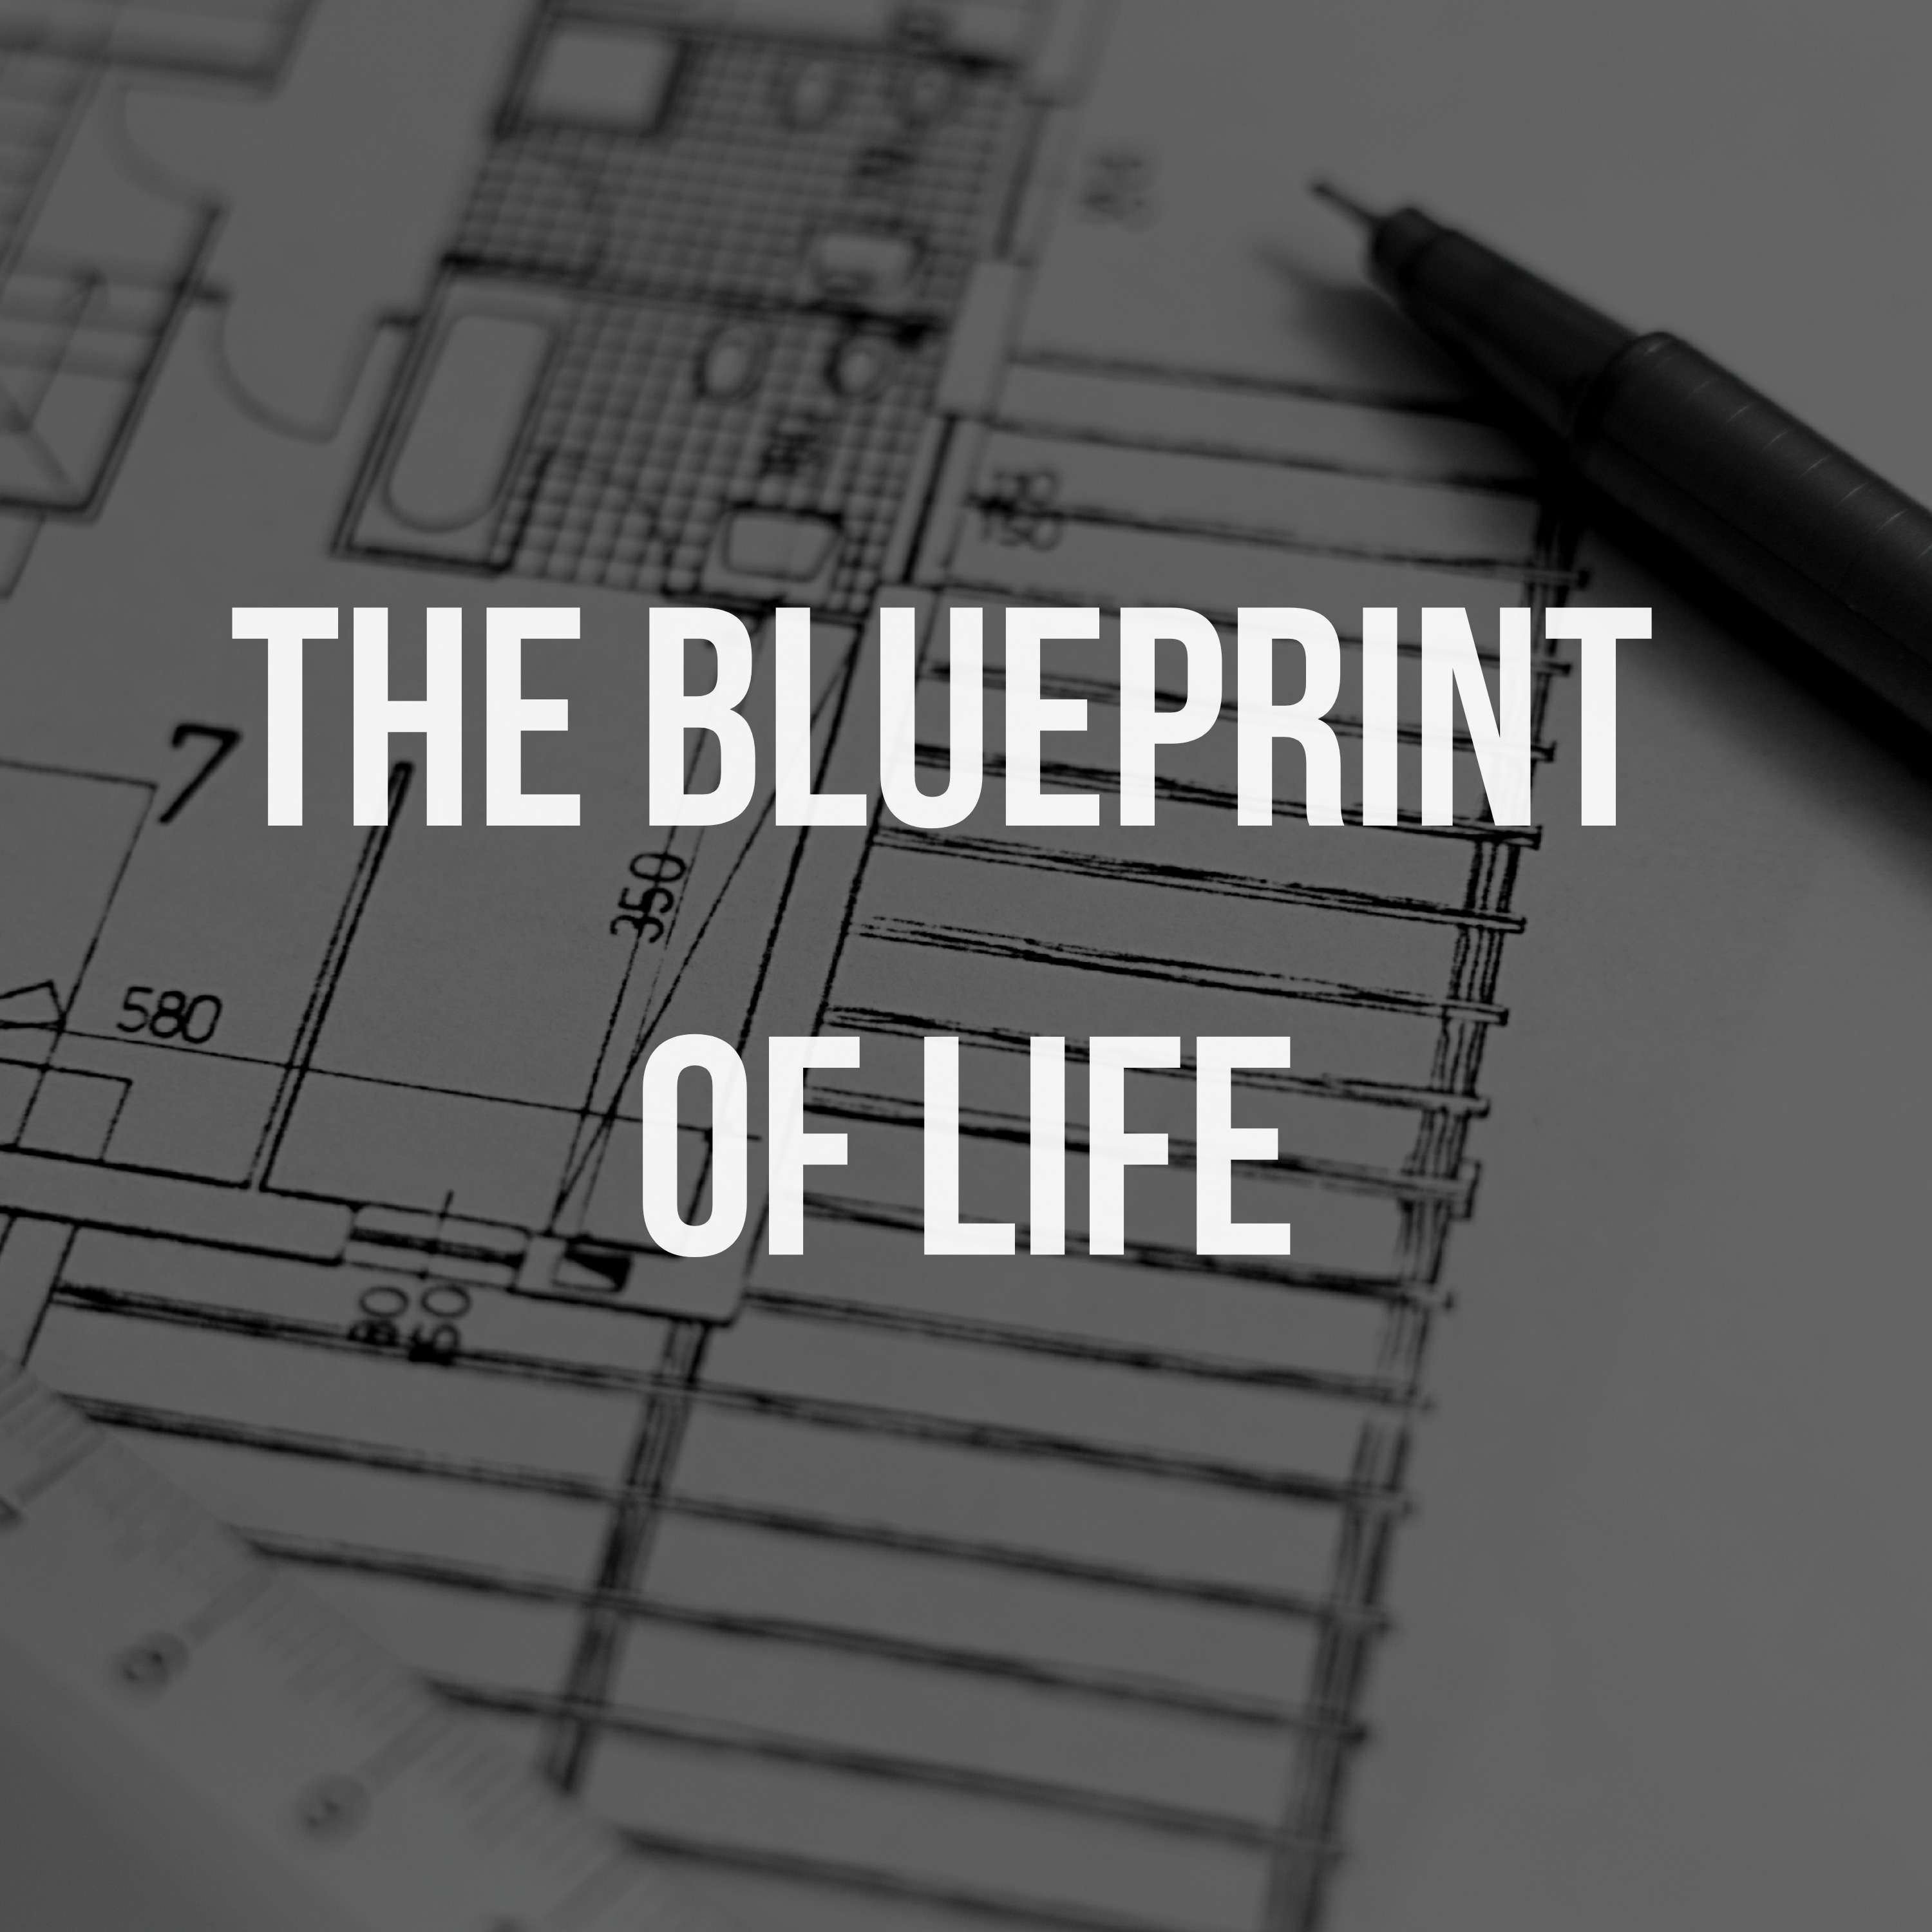 50: The Blueprint of Life